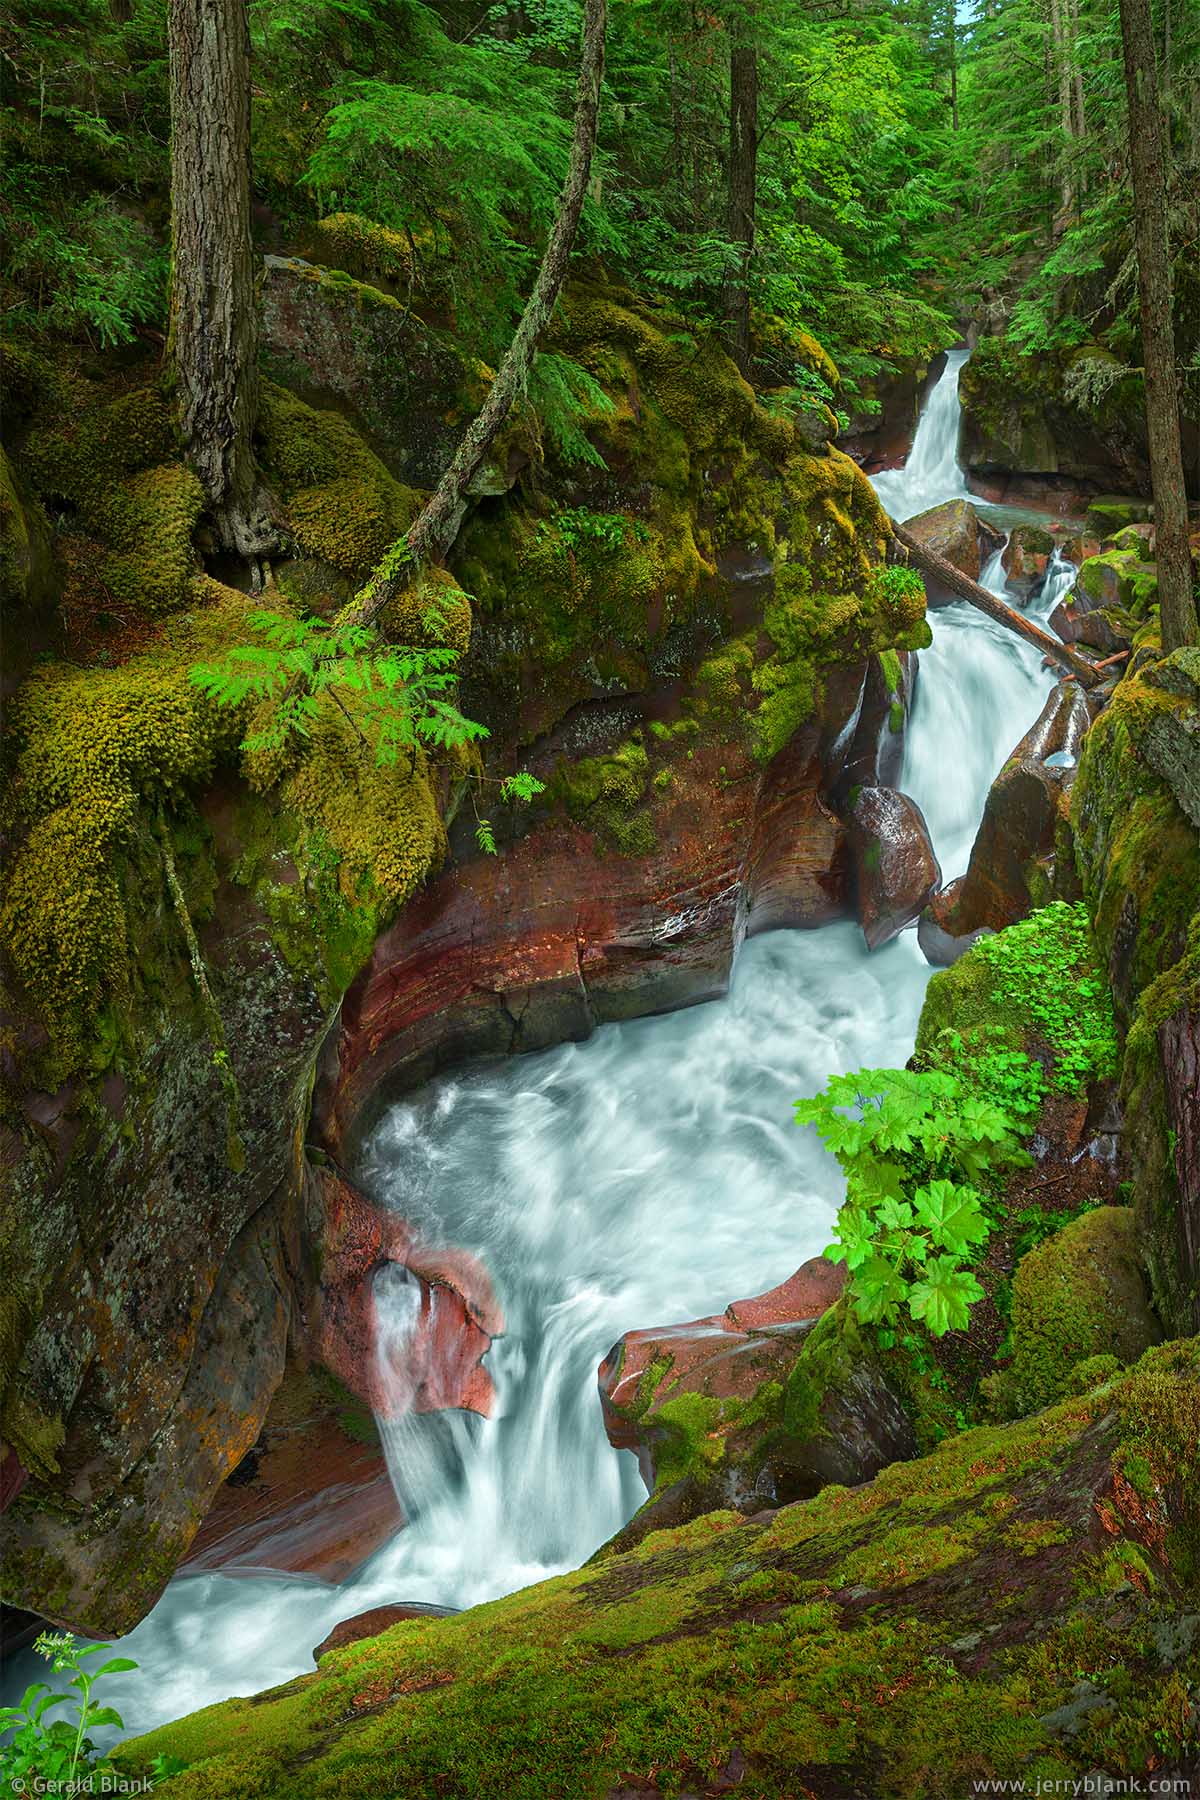 #25498 - Scenic Avalanche Creek falls, near the Trail of the Cedars in Glacier National Park, Montana - waterfall photo by Jerry Blank